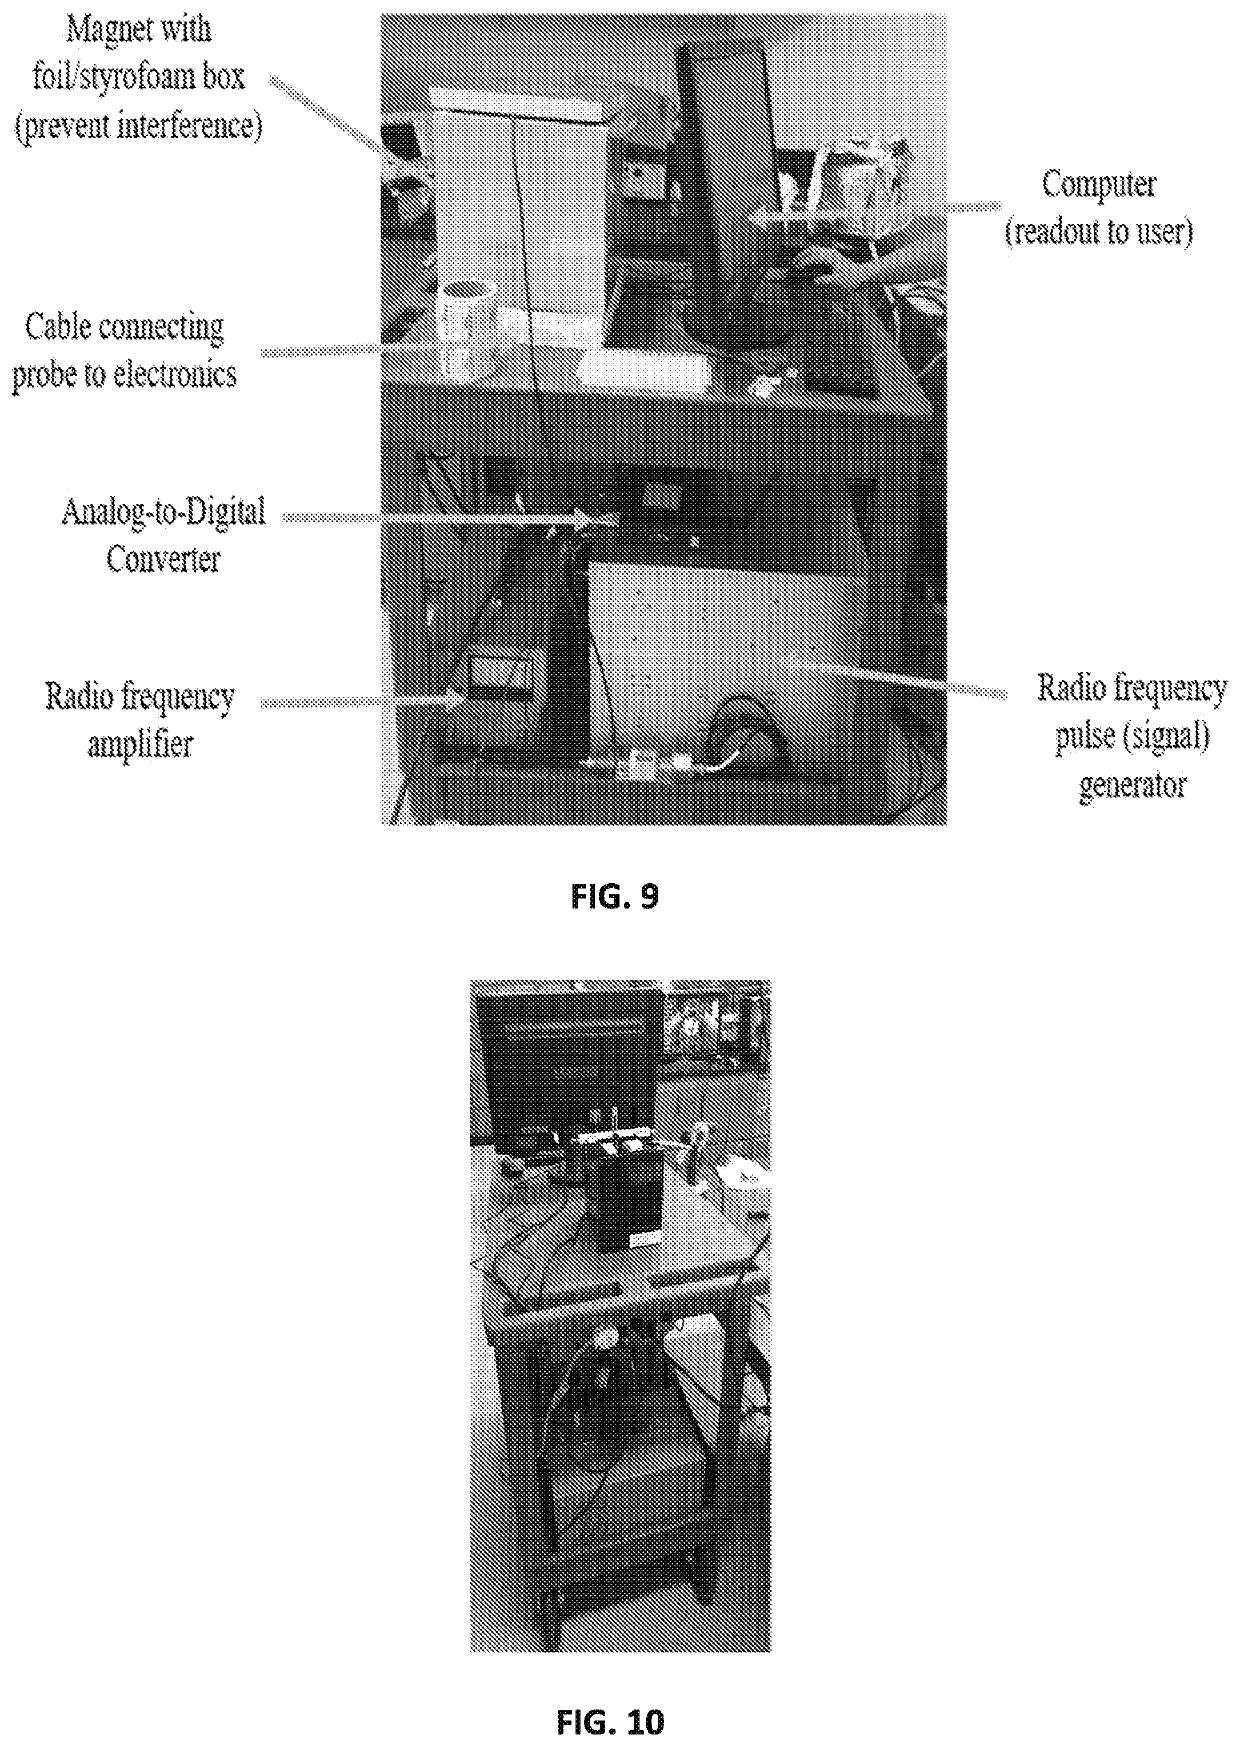 Portable nmr instrumentation and methods for analysis of body fluids